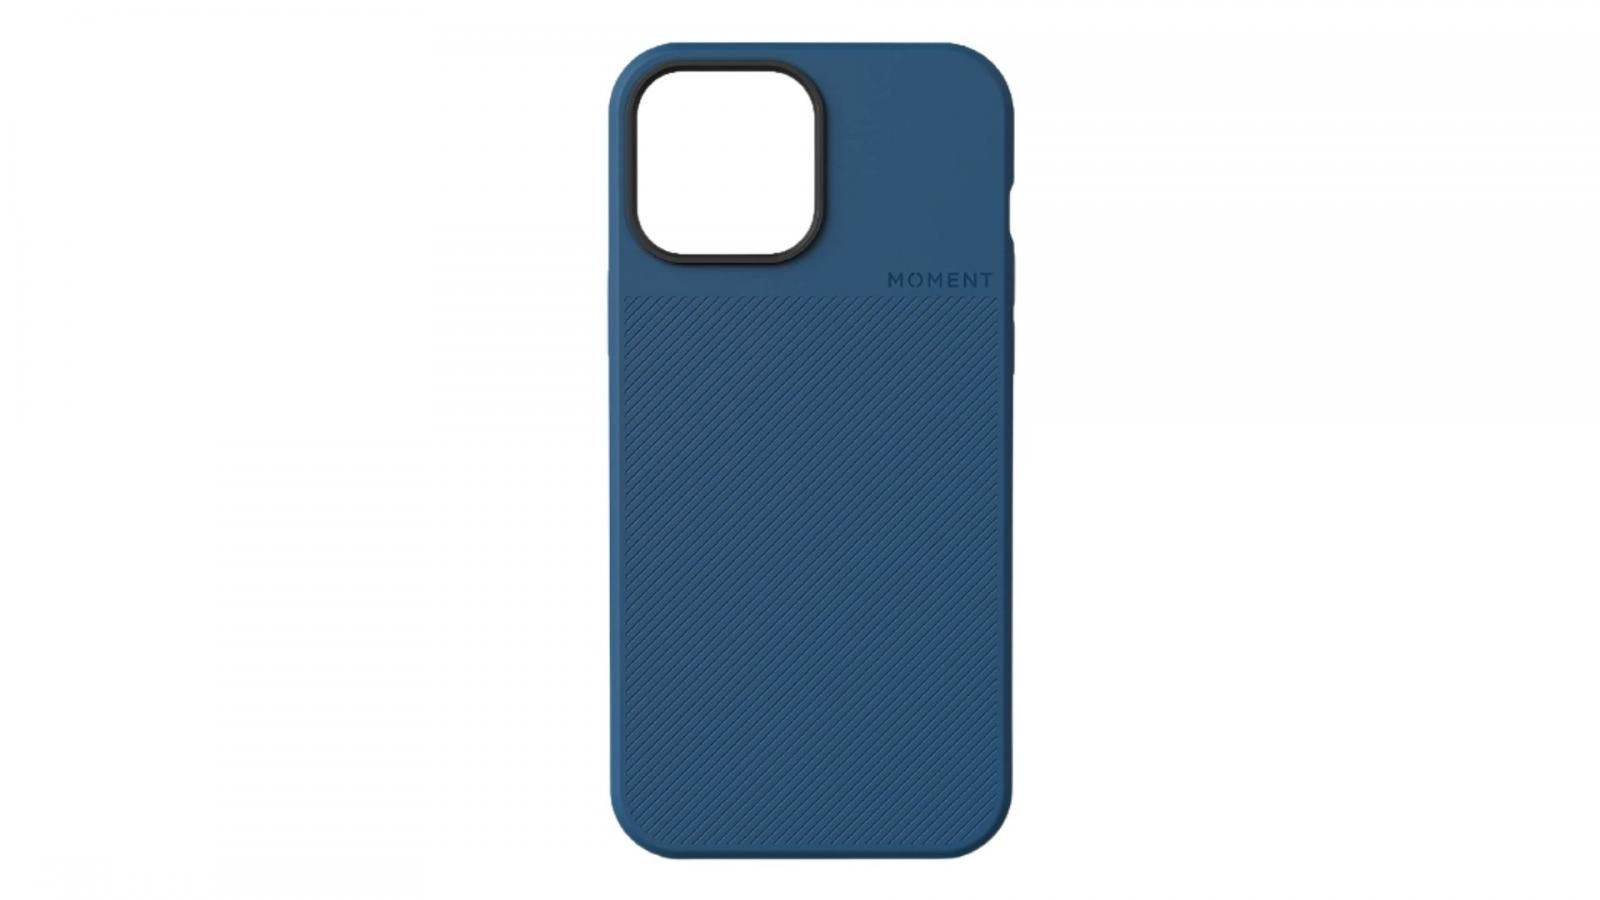 Moment Case for iPhone 13 mini